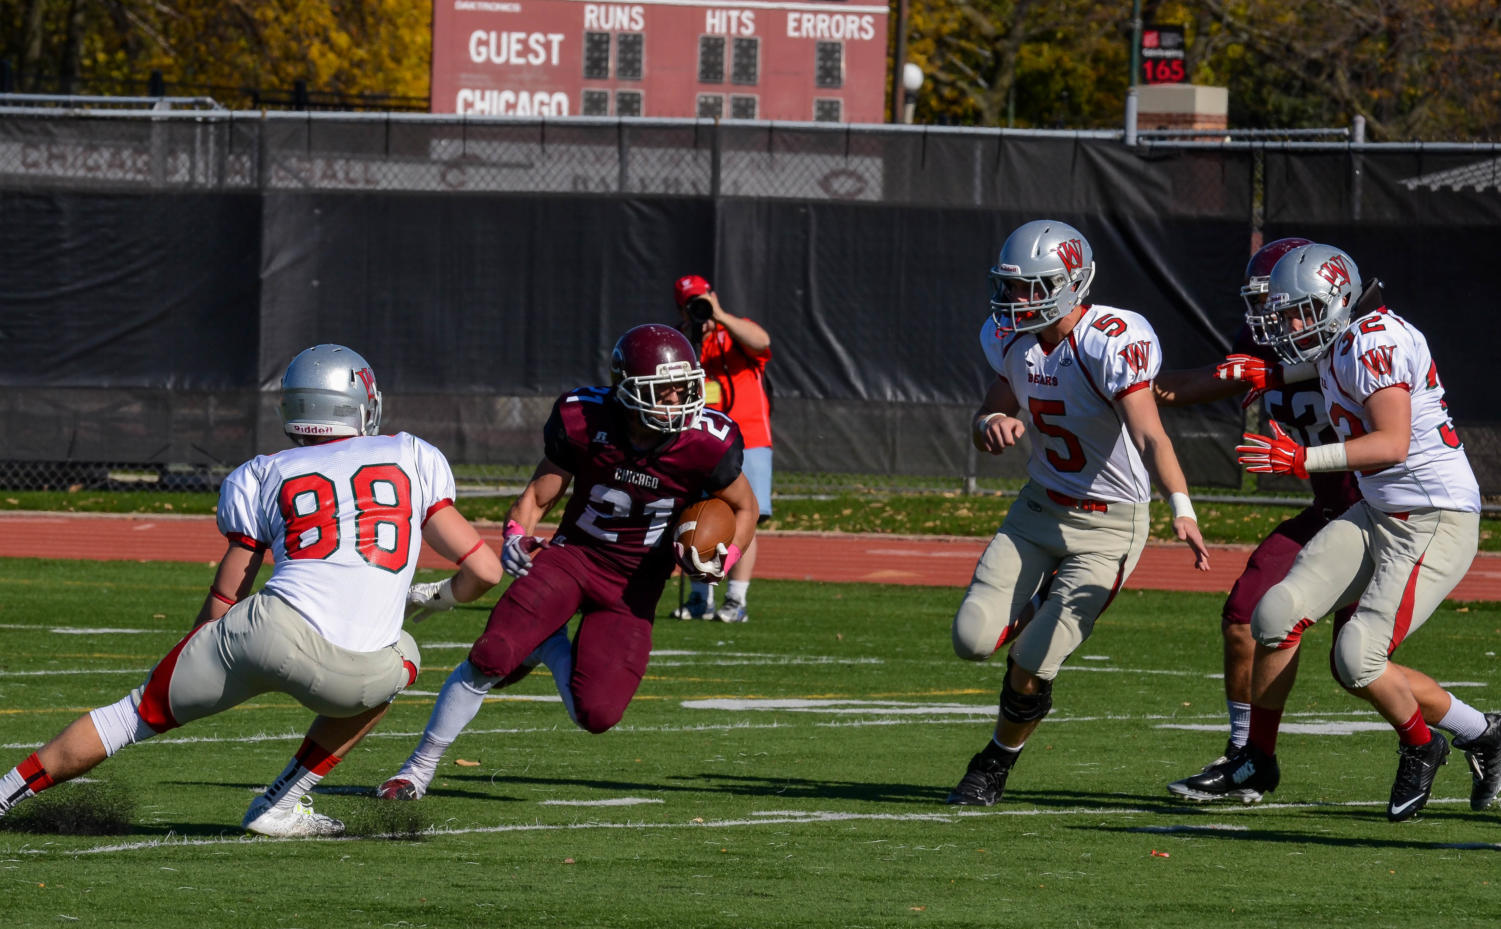 Third-year cornerback Vincent Beltrano returns the ball against Wash U at the Homecoming game last Saturday.